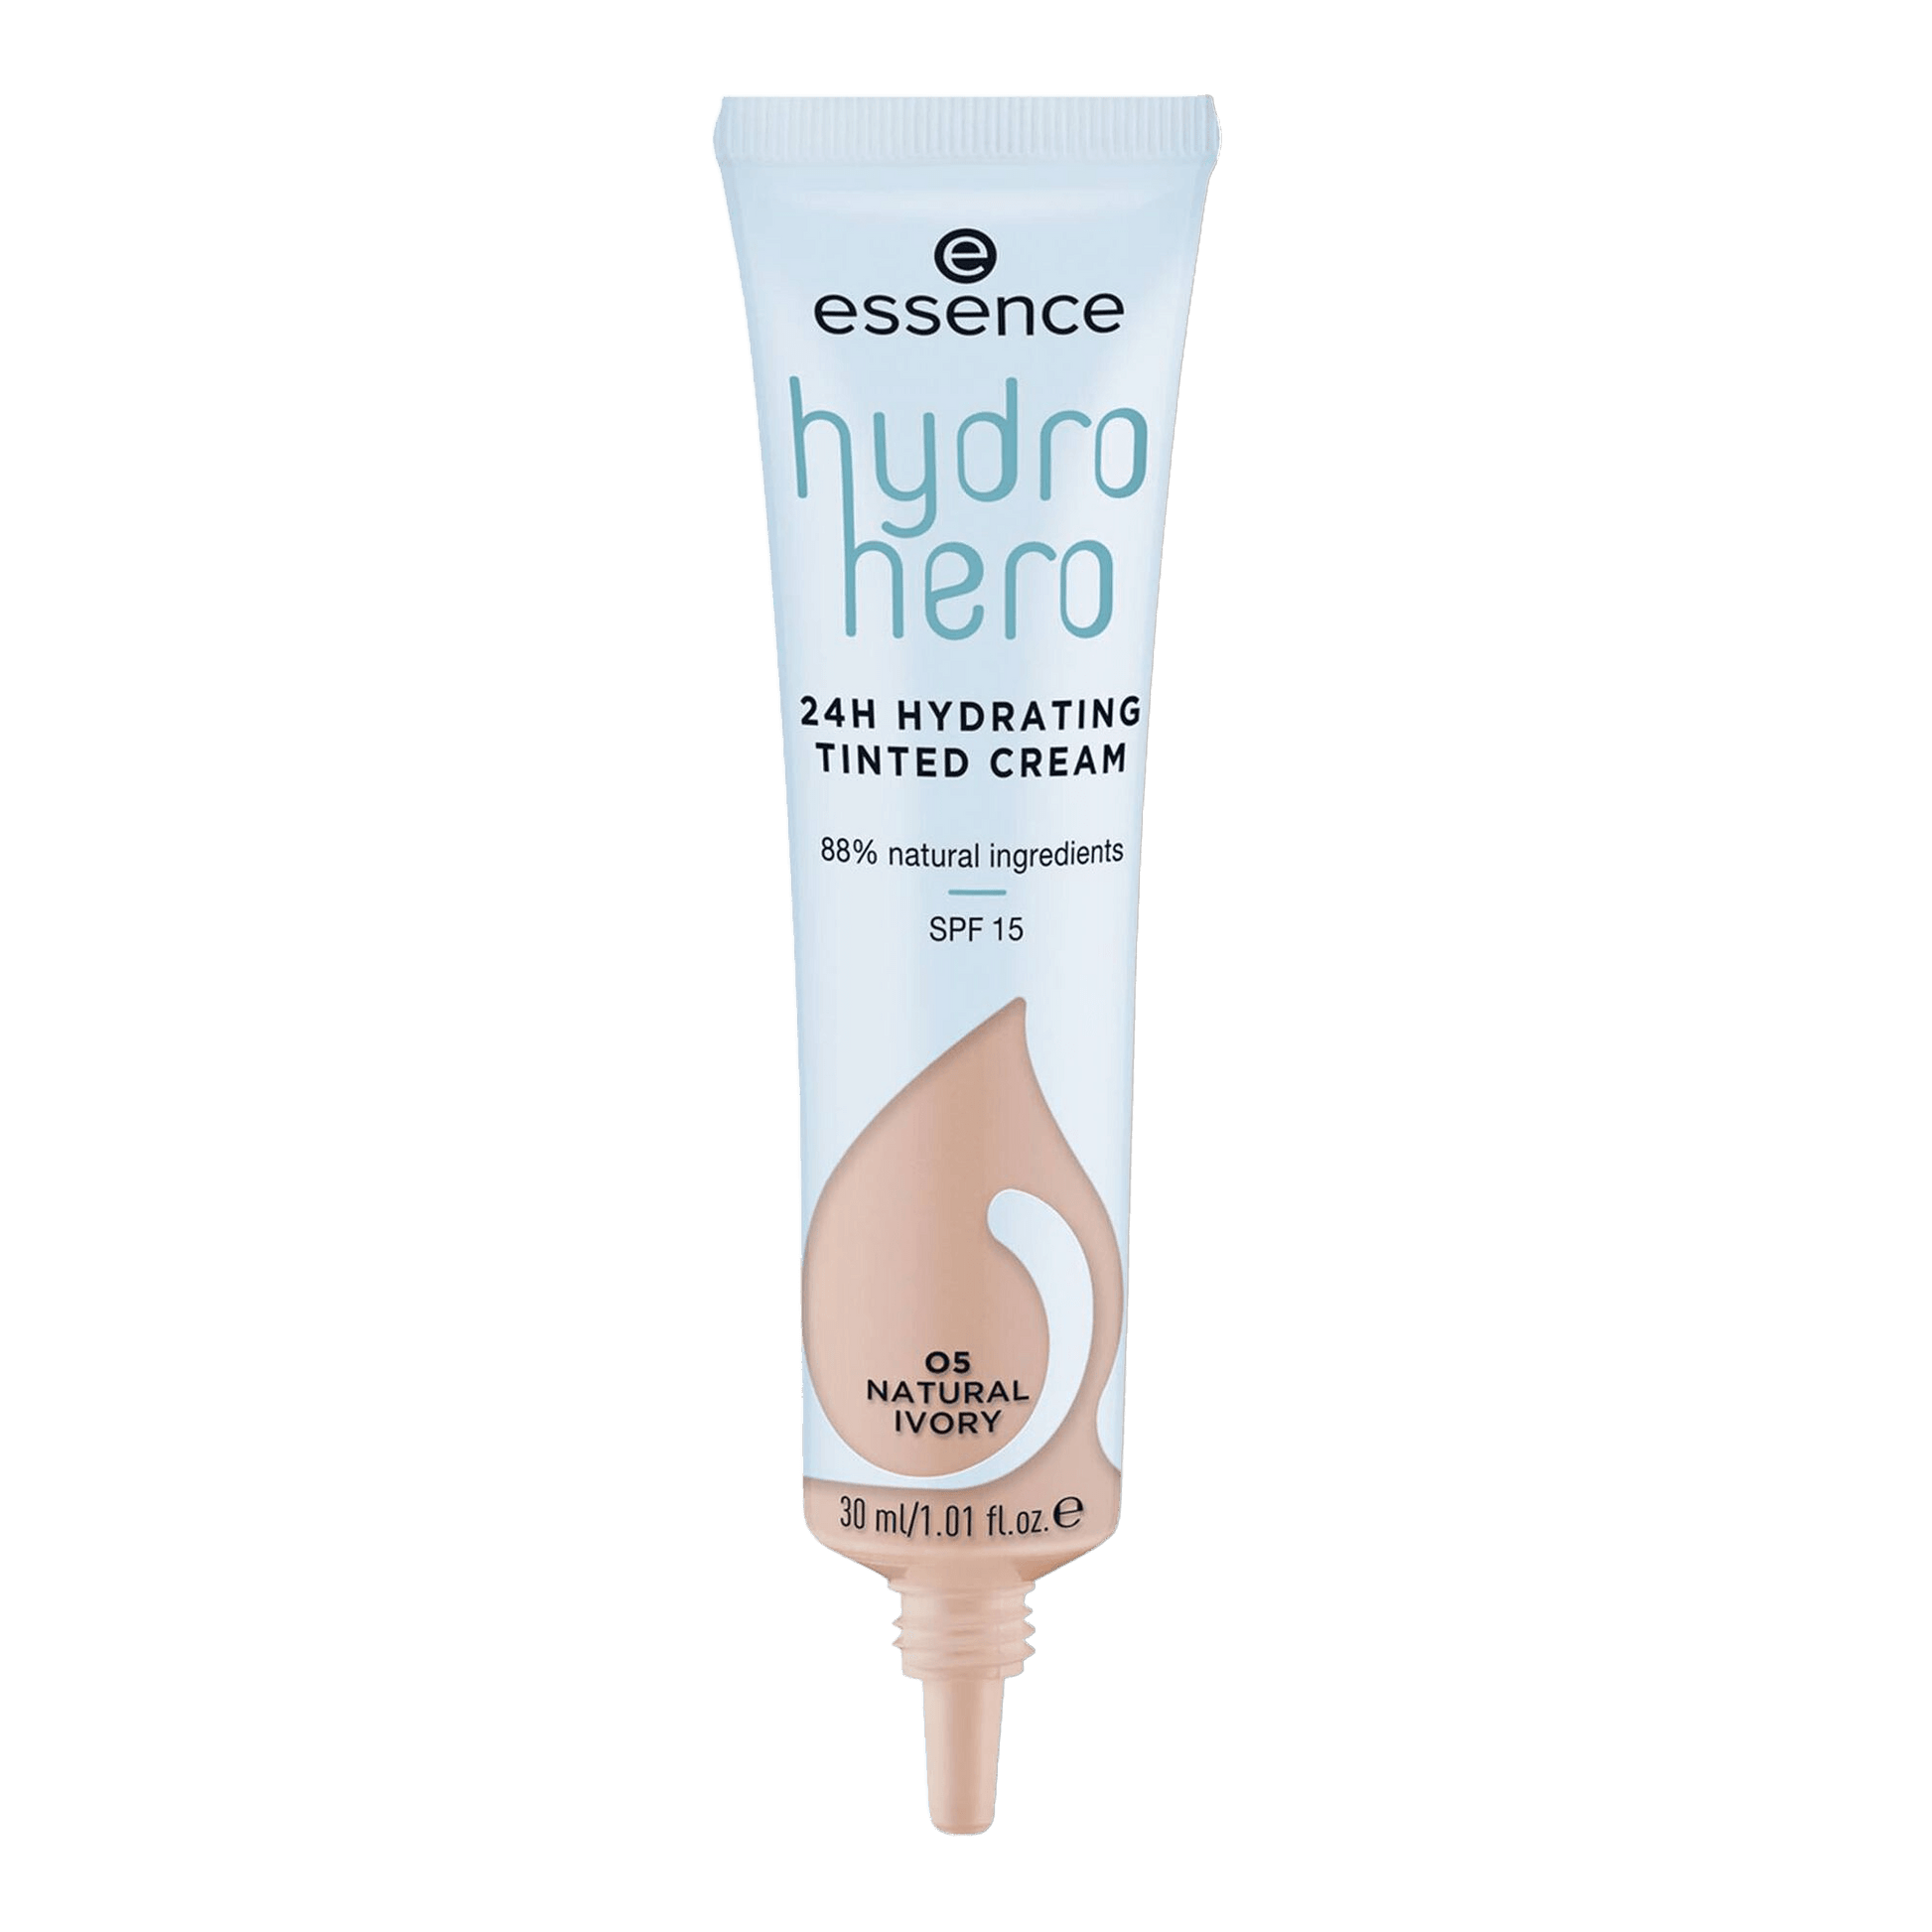 NEW ESSENCE - Hydro Hero 24h Hydrating Tinted Cream REVIEW